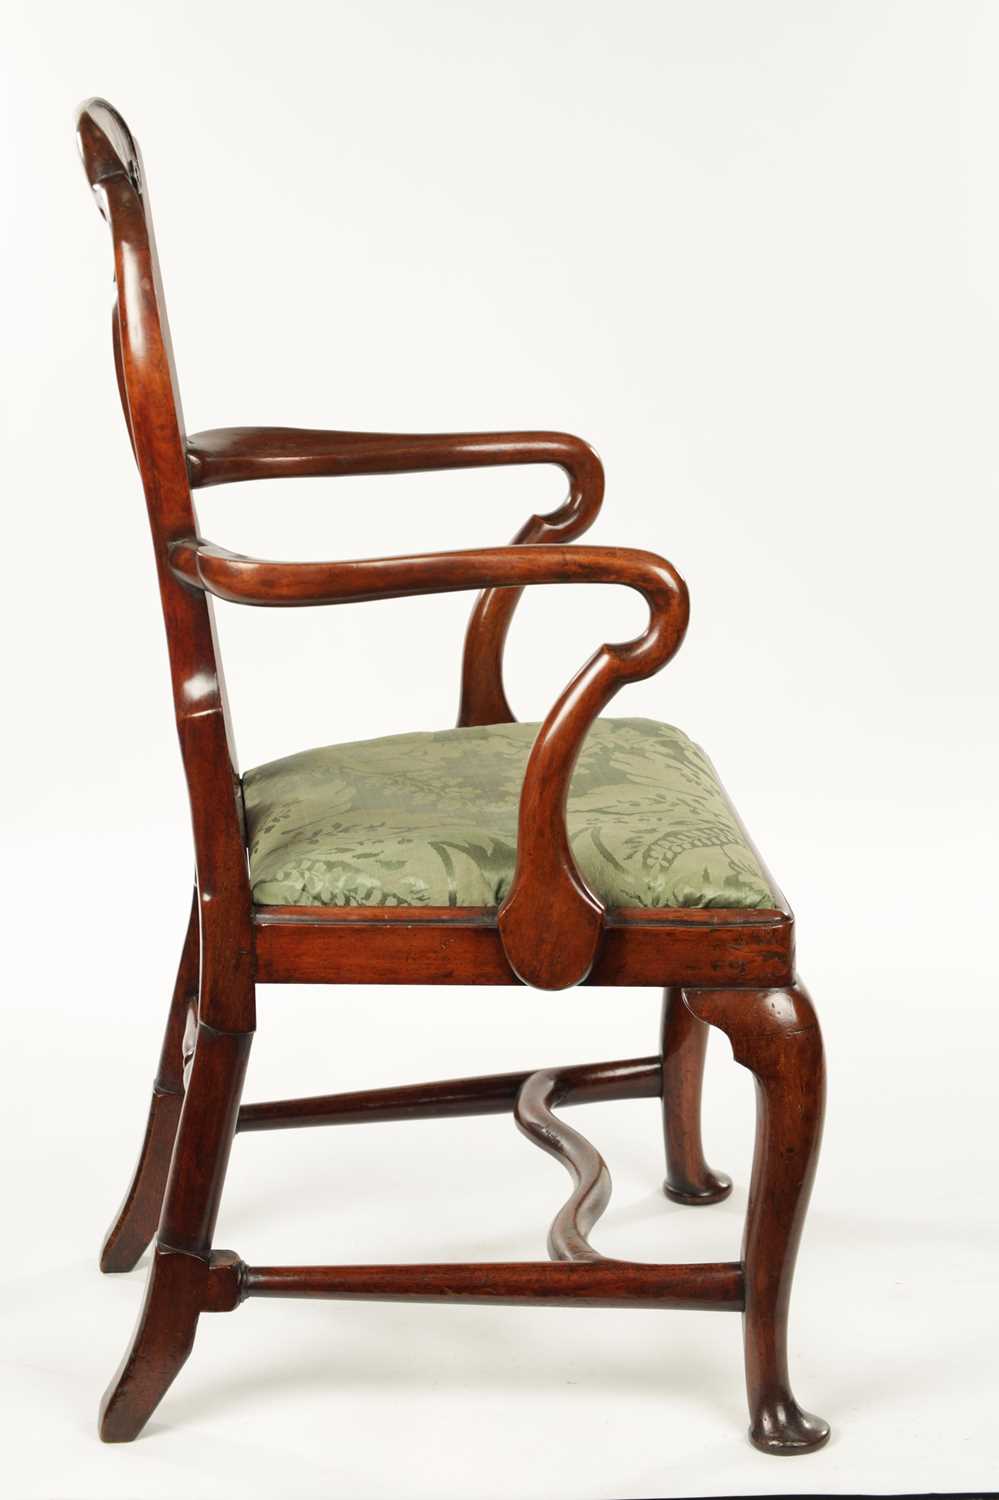 AN 18TH CENTURY WALNUT AND MARQUETRY INLAID ARM CHAIR - Image 10 of 10